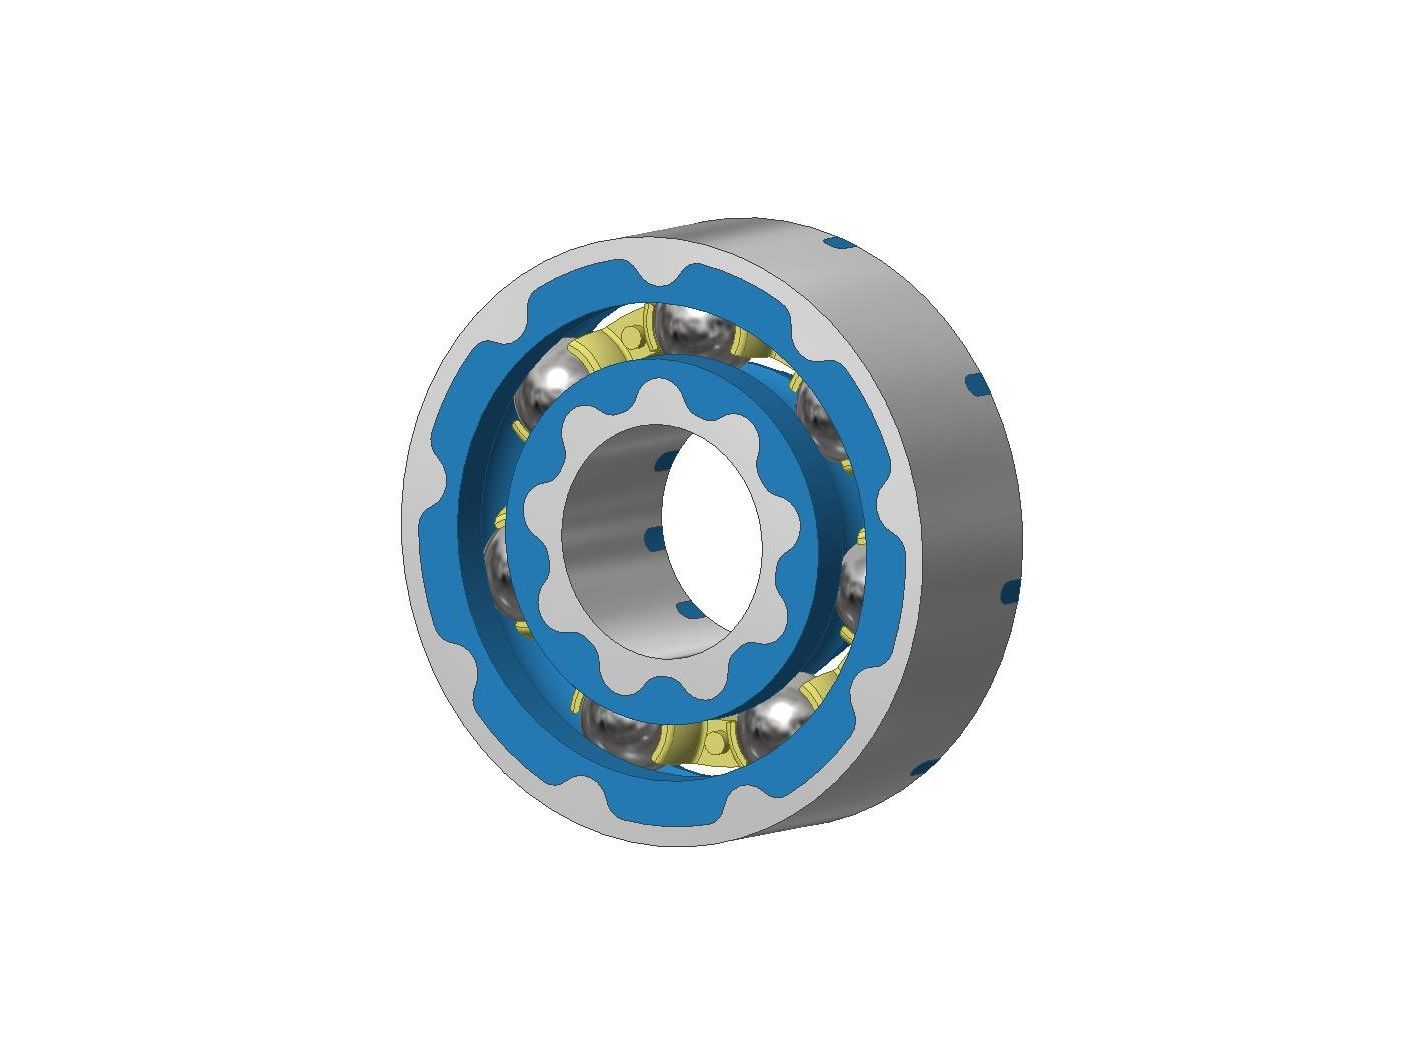 Two component polymer ball bearing